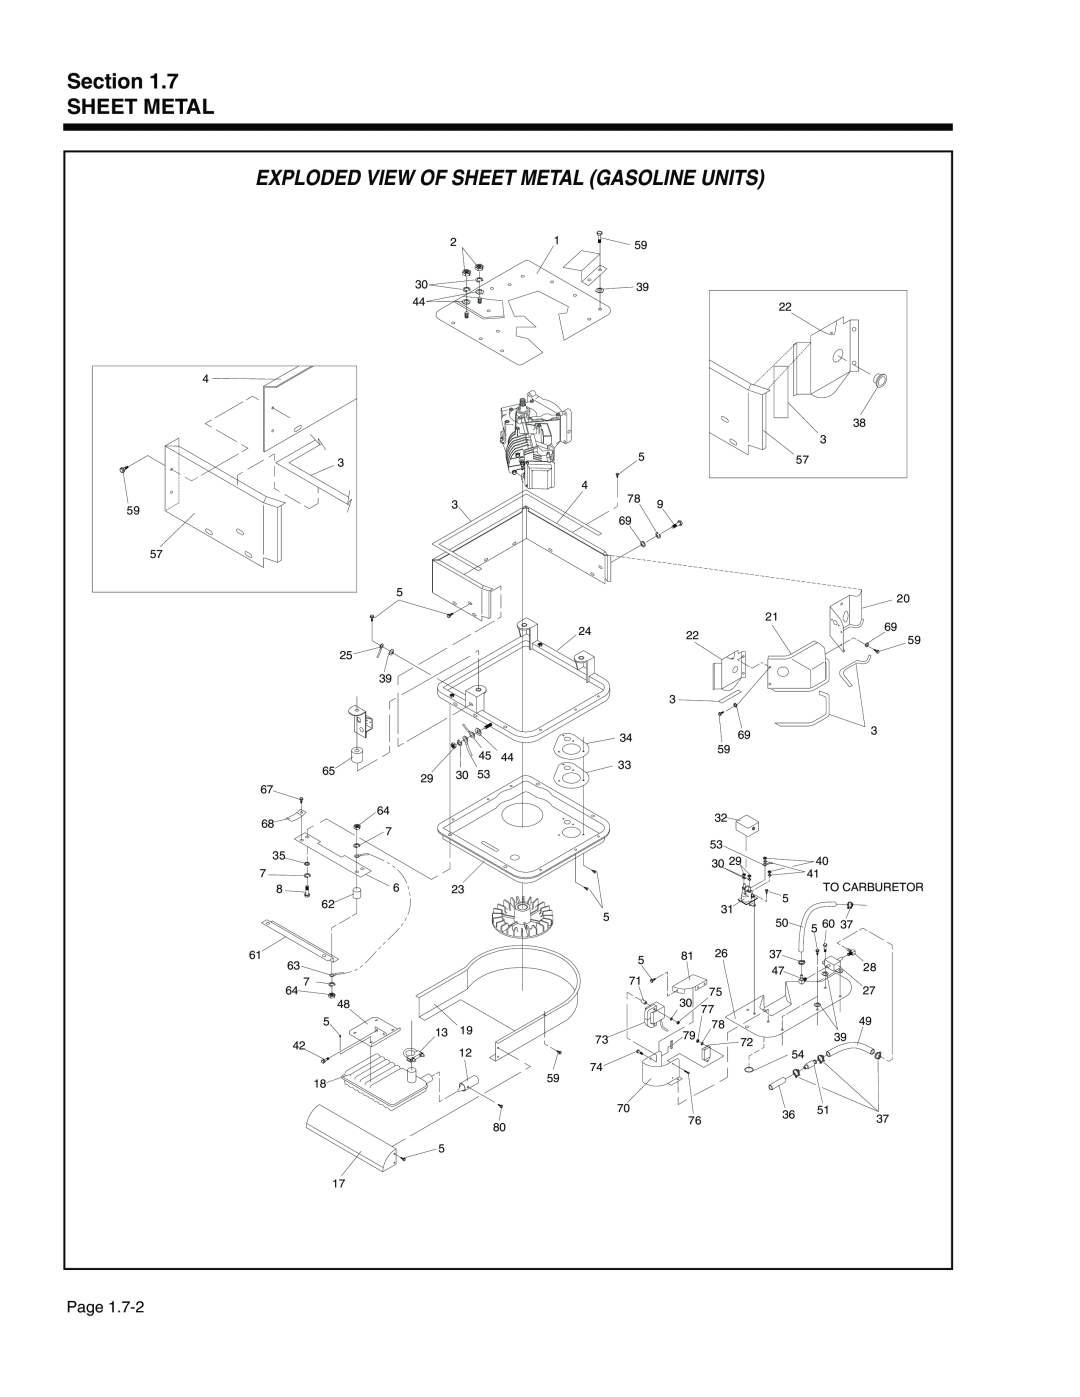 Generac Power Systems 940-2 Exploded View Of Sheet Metal Gasoline Units, Section SHEET METAL, Page, To Carburetor, 5 60 